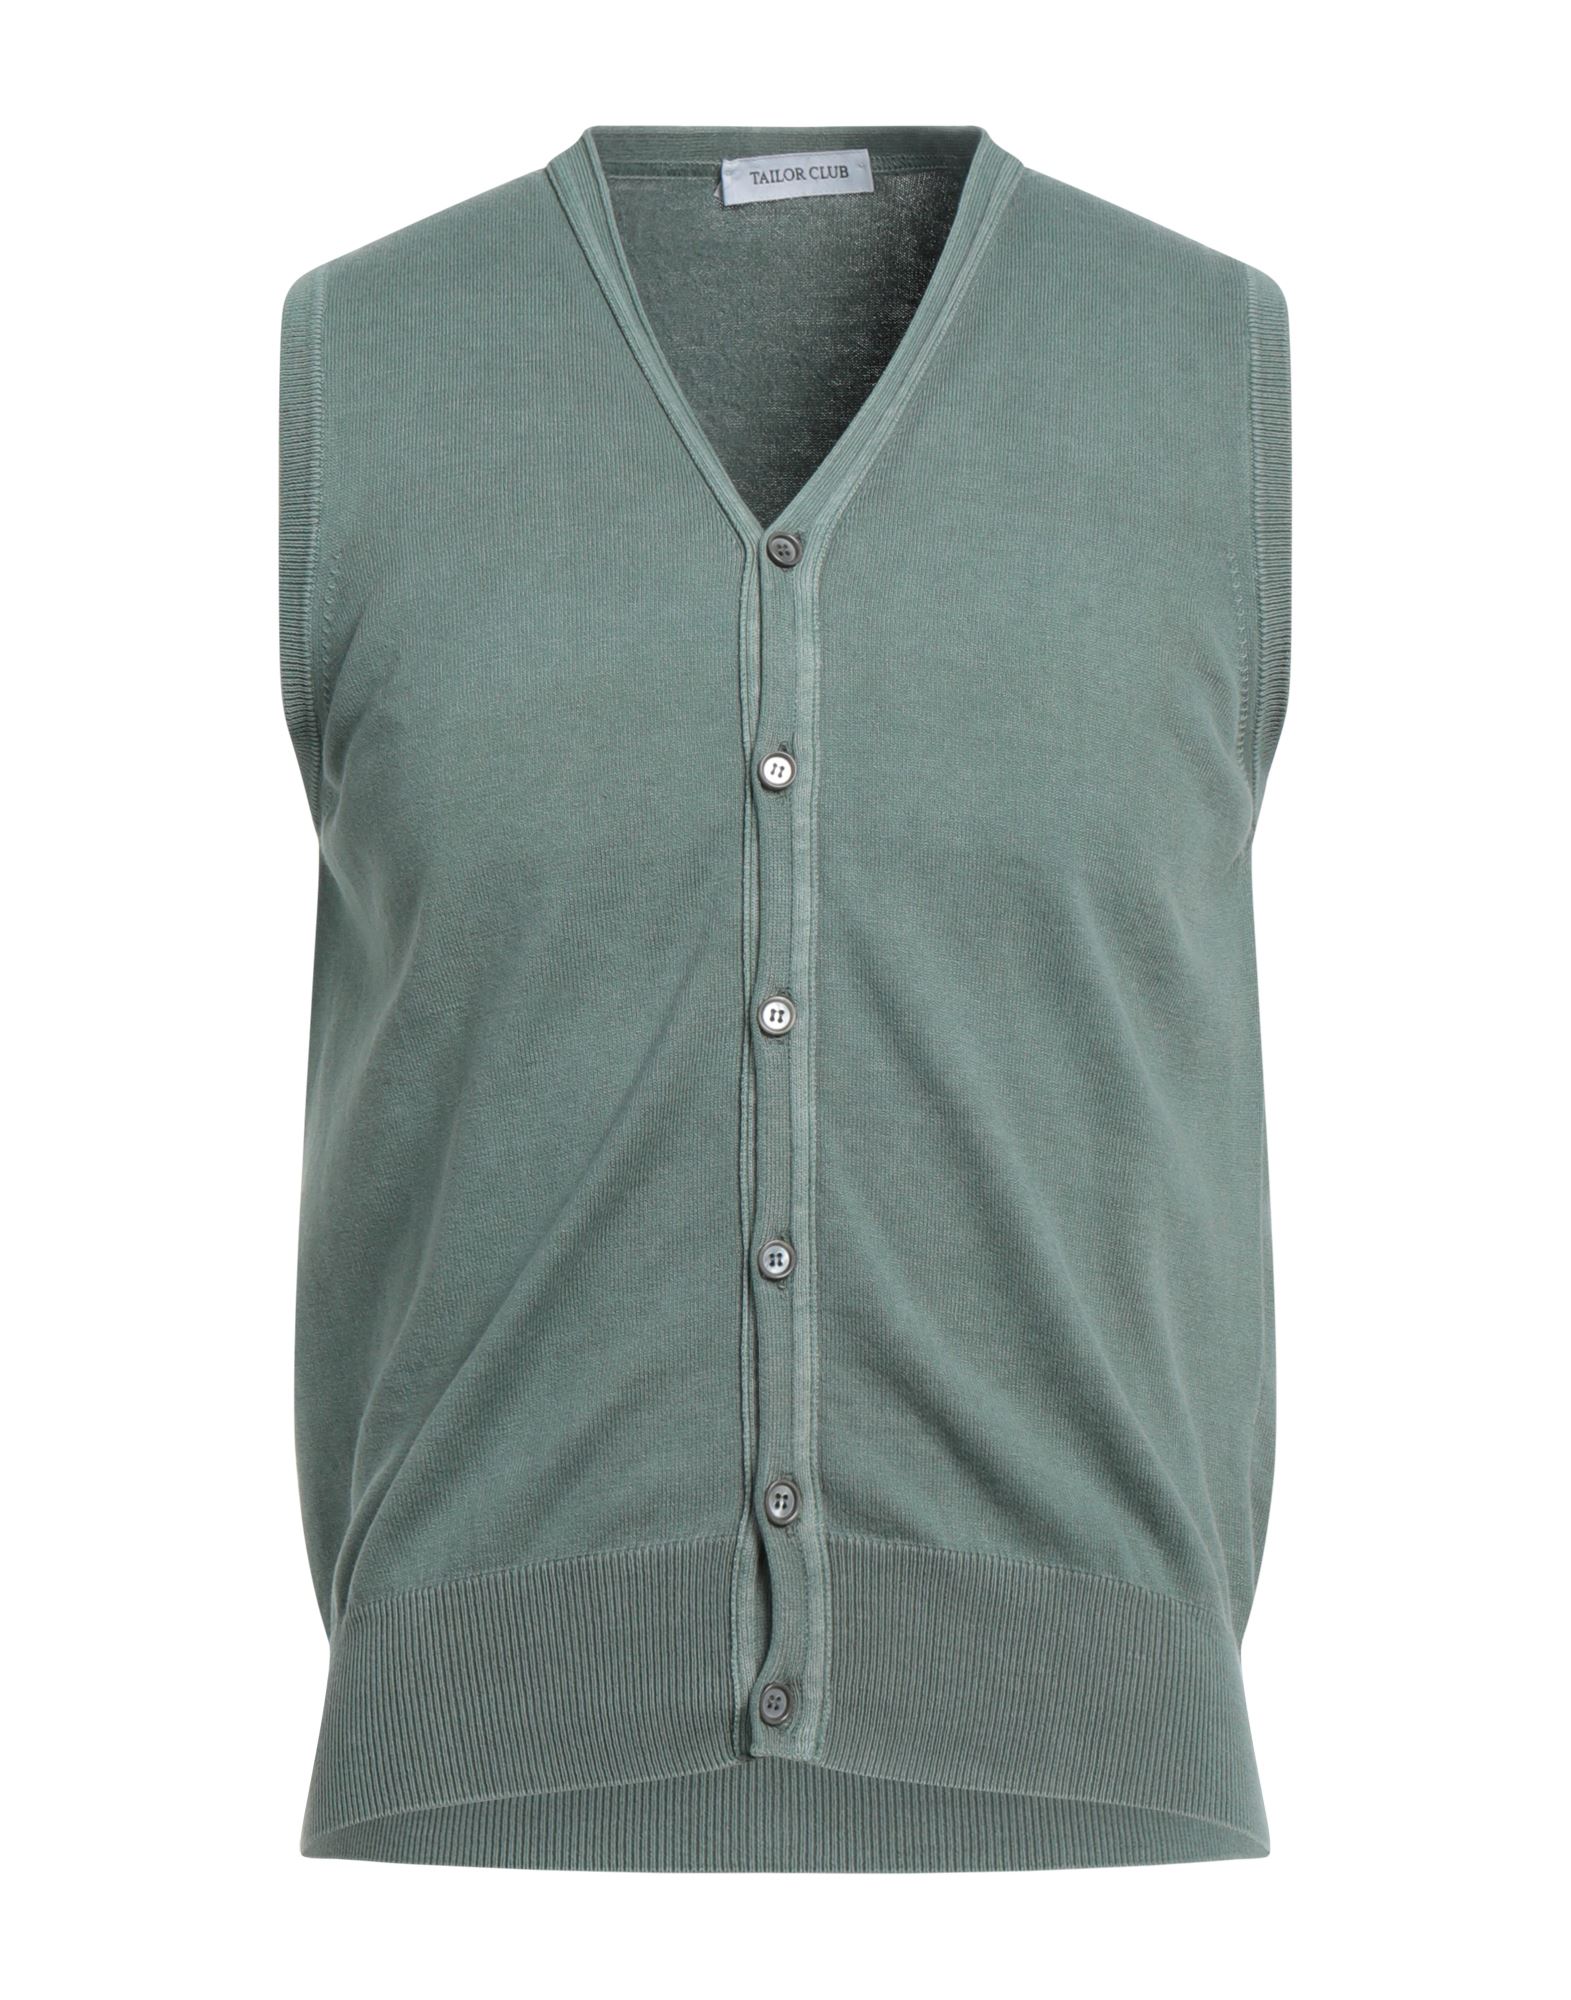 Tailor Club Cardigans In Sage Green